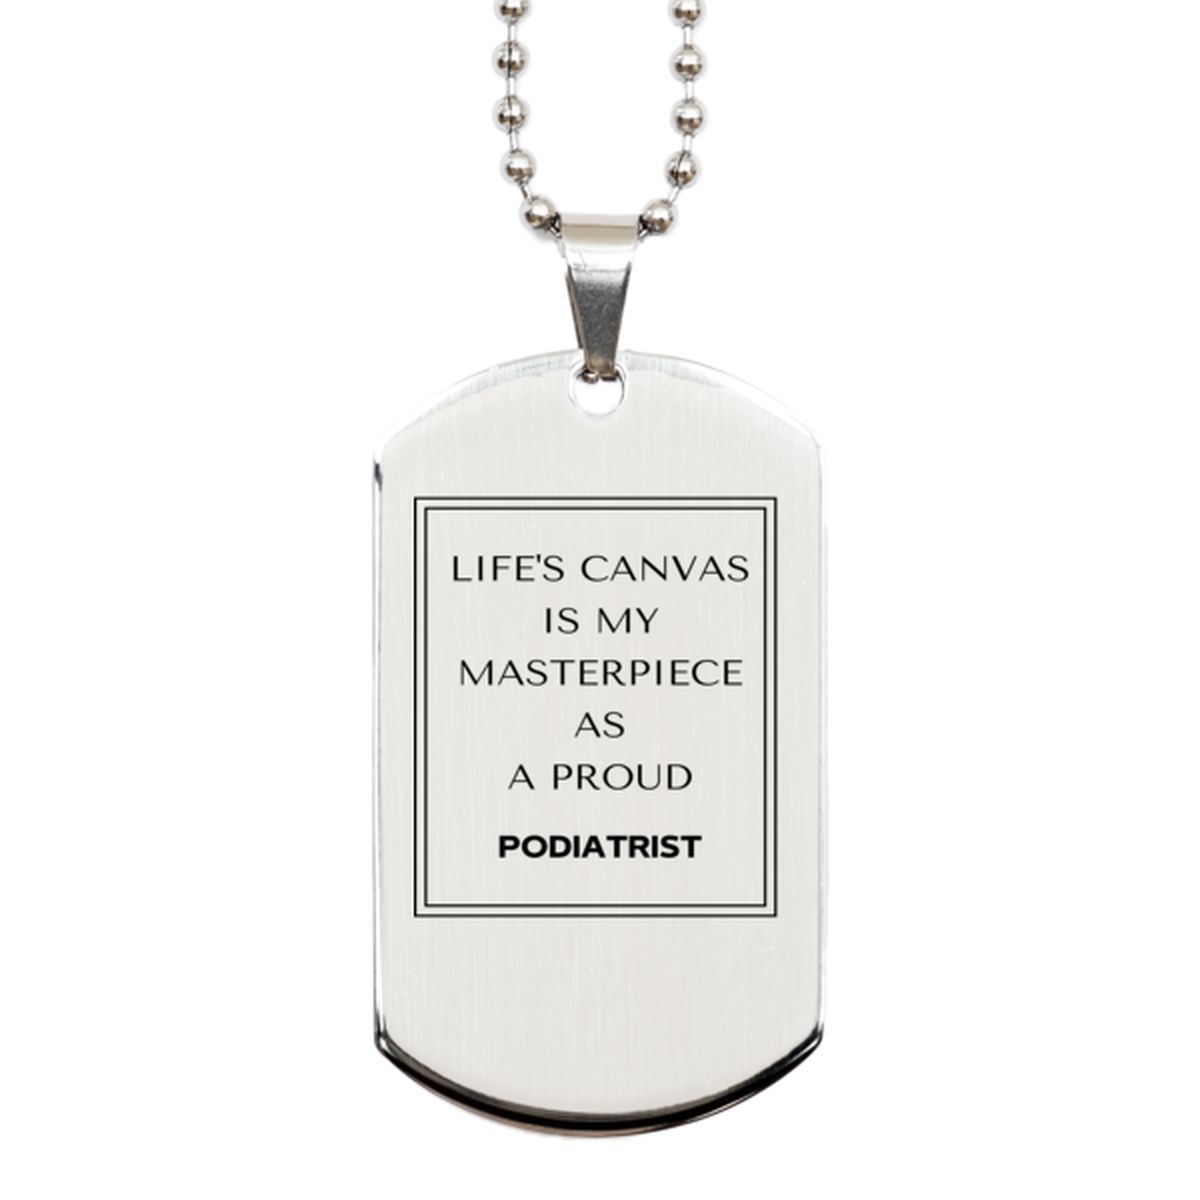 Proud Podiatrist Gifts, Life's canvas is my masterpiece, Epic Birthday Christmas Unique Silver Dog Tag For Podiatrist, Coworkers, Men, Women, Friends